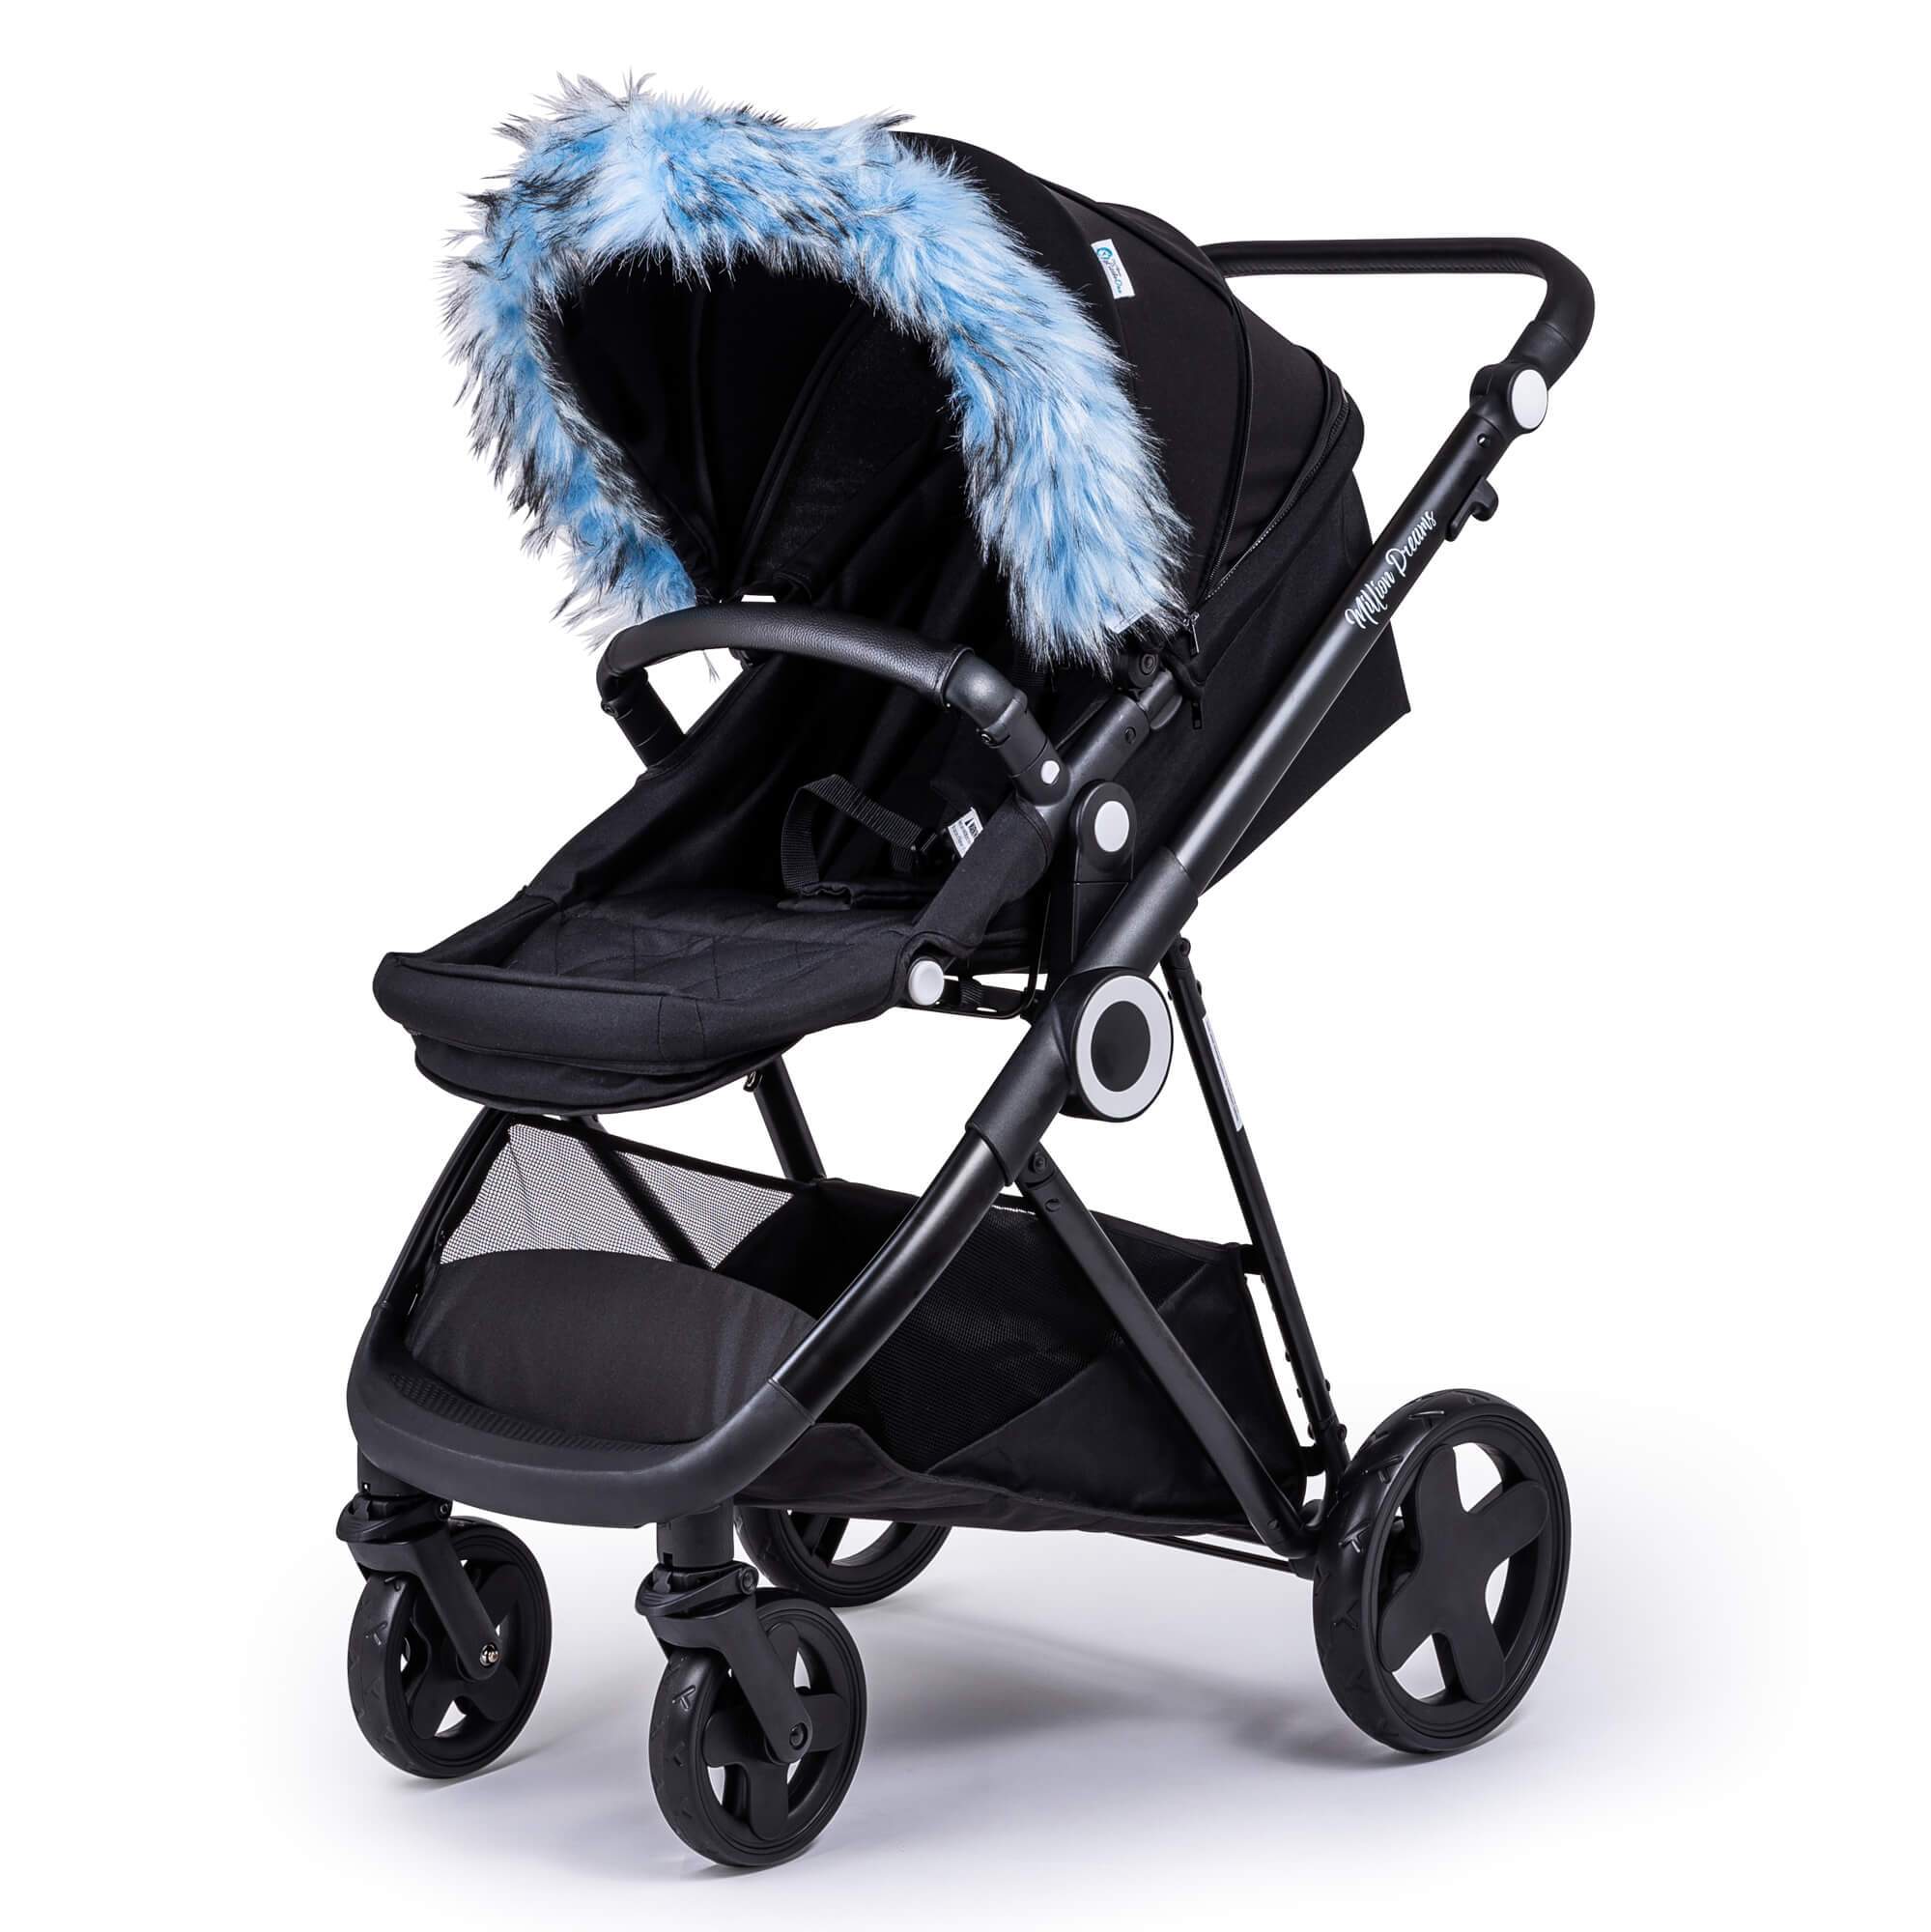 Pram Fur Hood Trim Attachment for Pushchair Compatible with Firstwheels - Light Blue / Fits All Models | For Your Little One